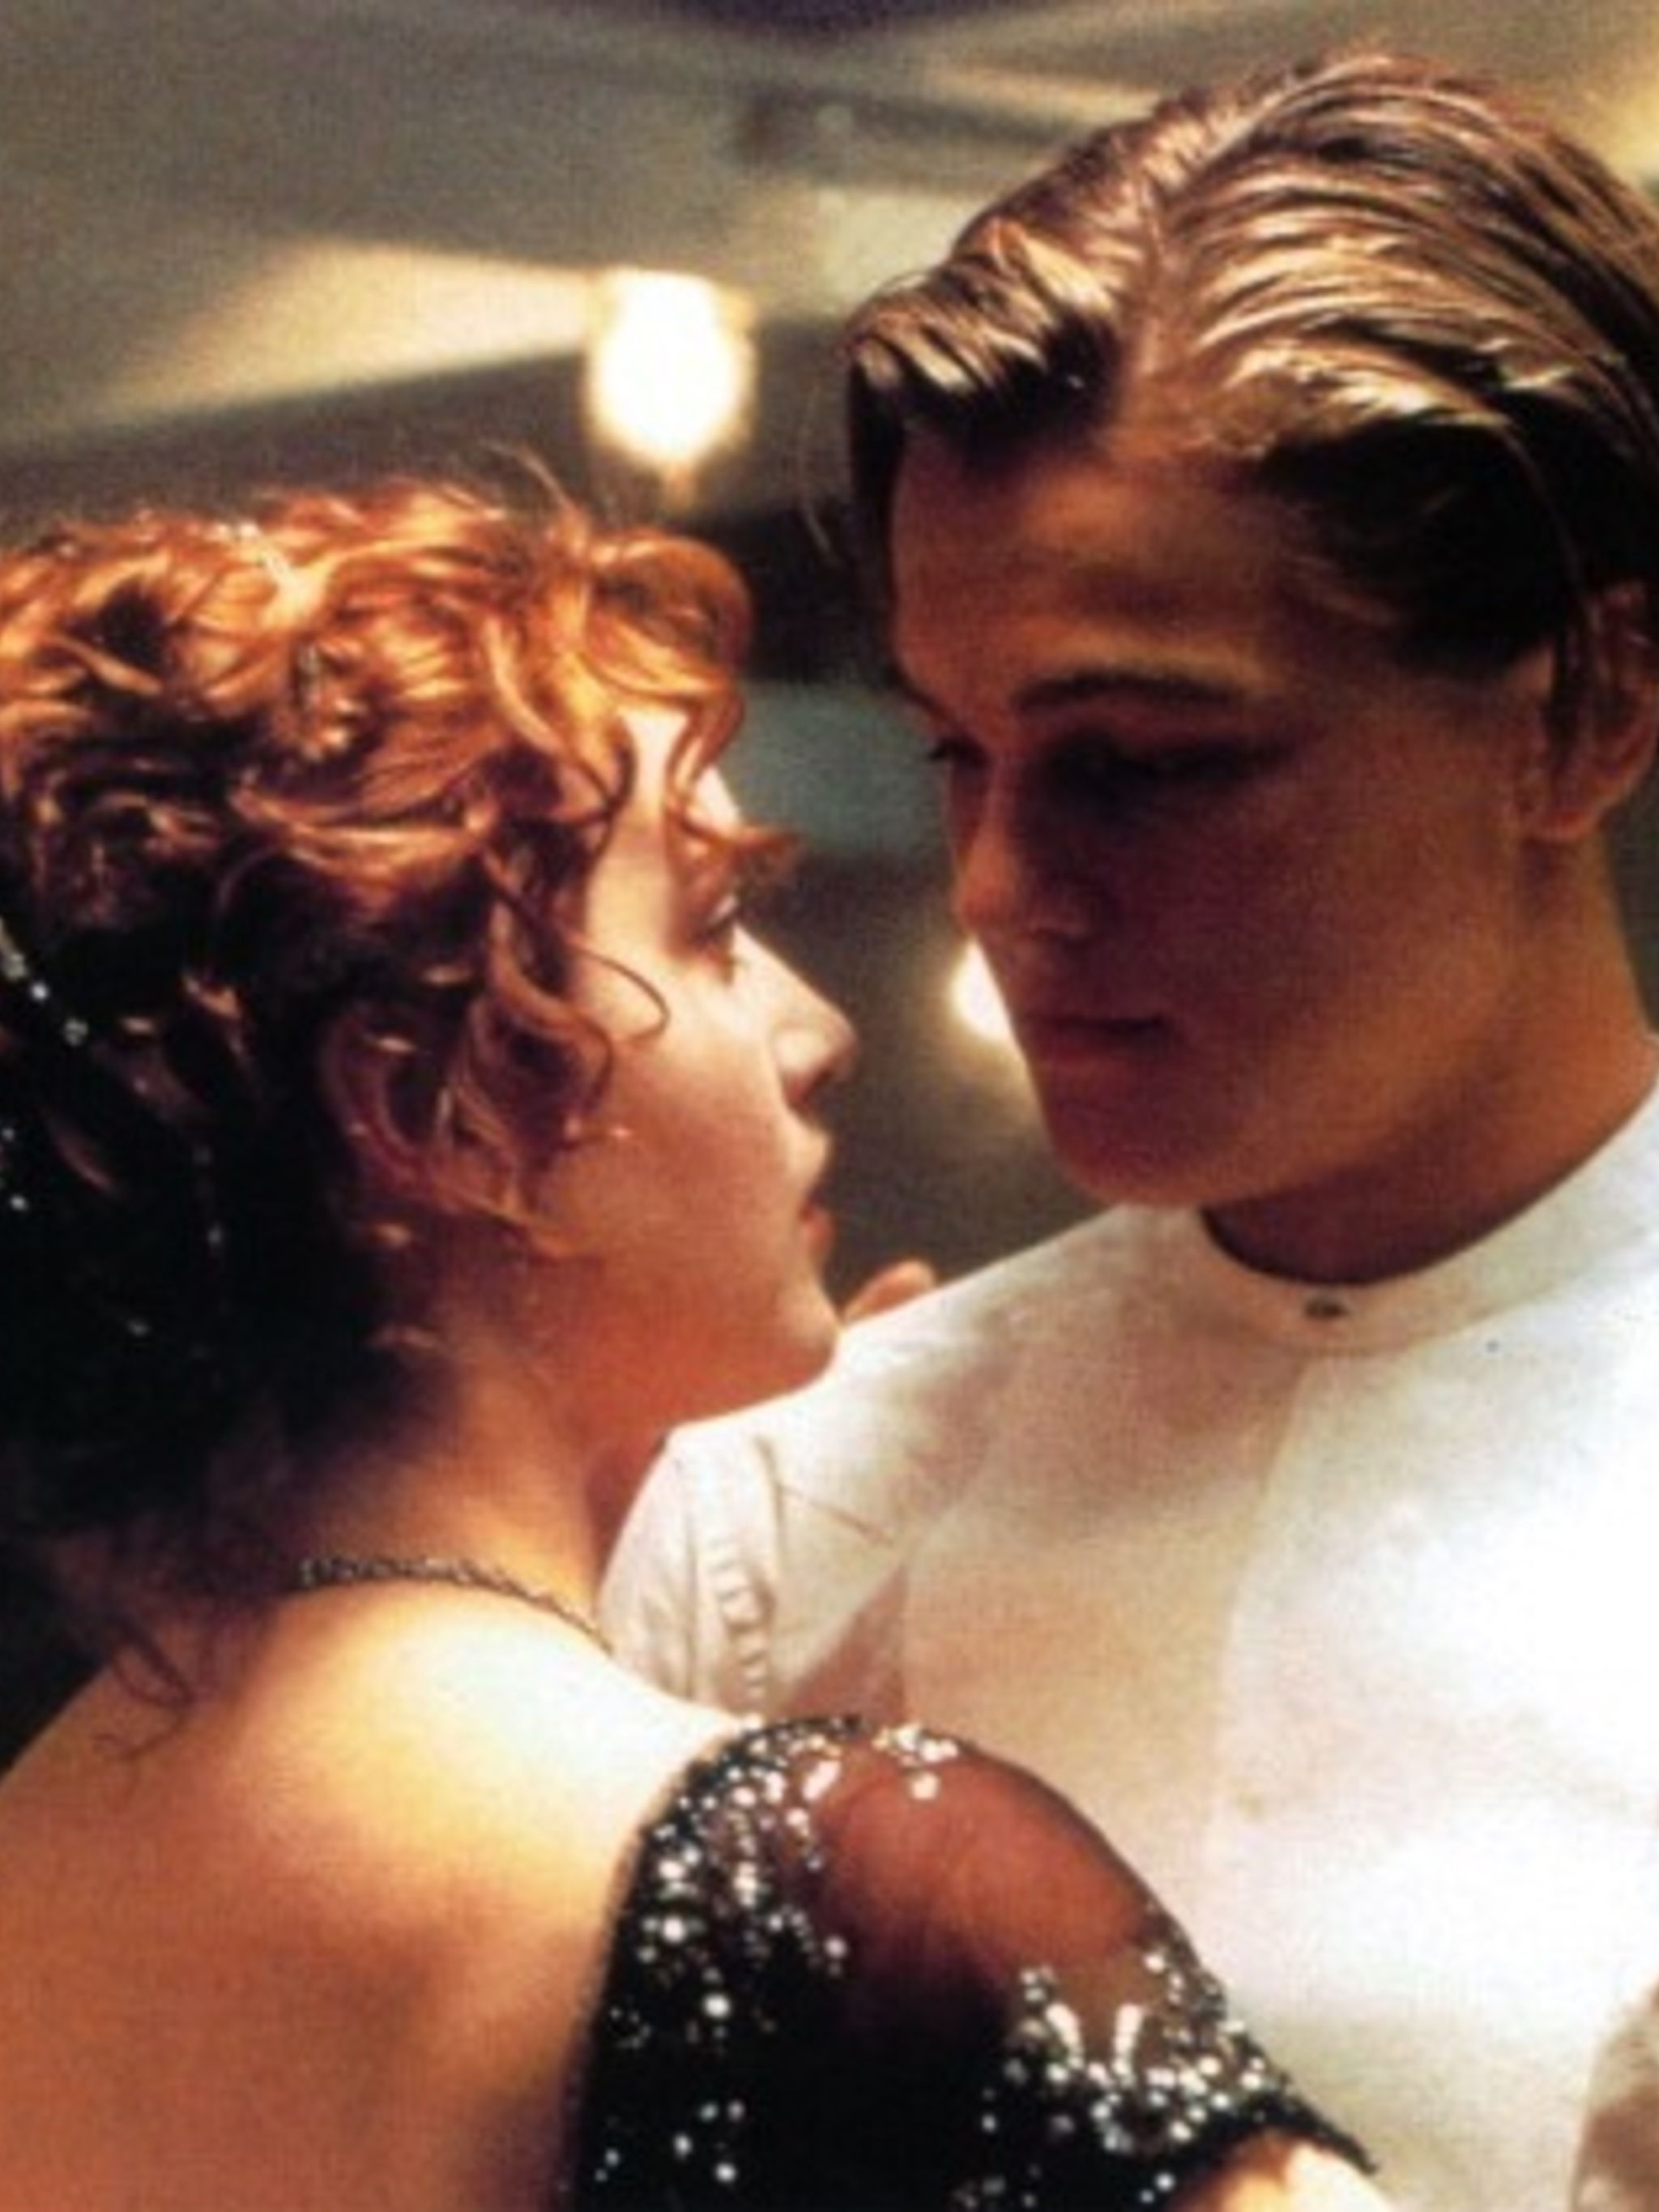 Cheesy and Misogynistic': A Teen Watches 'Titanic' for the First Time